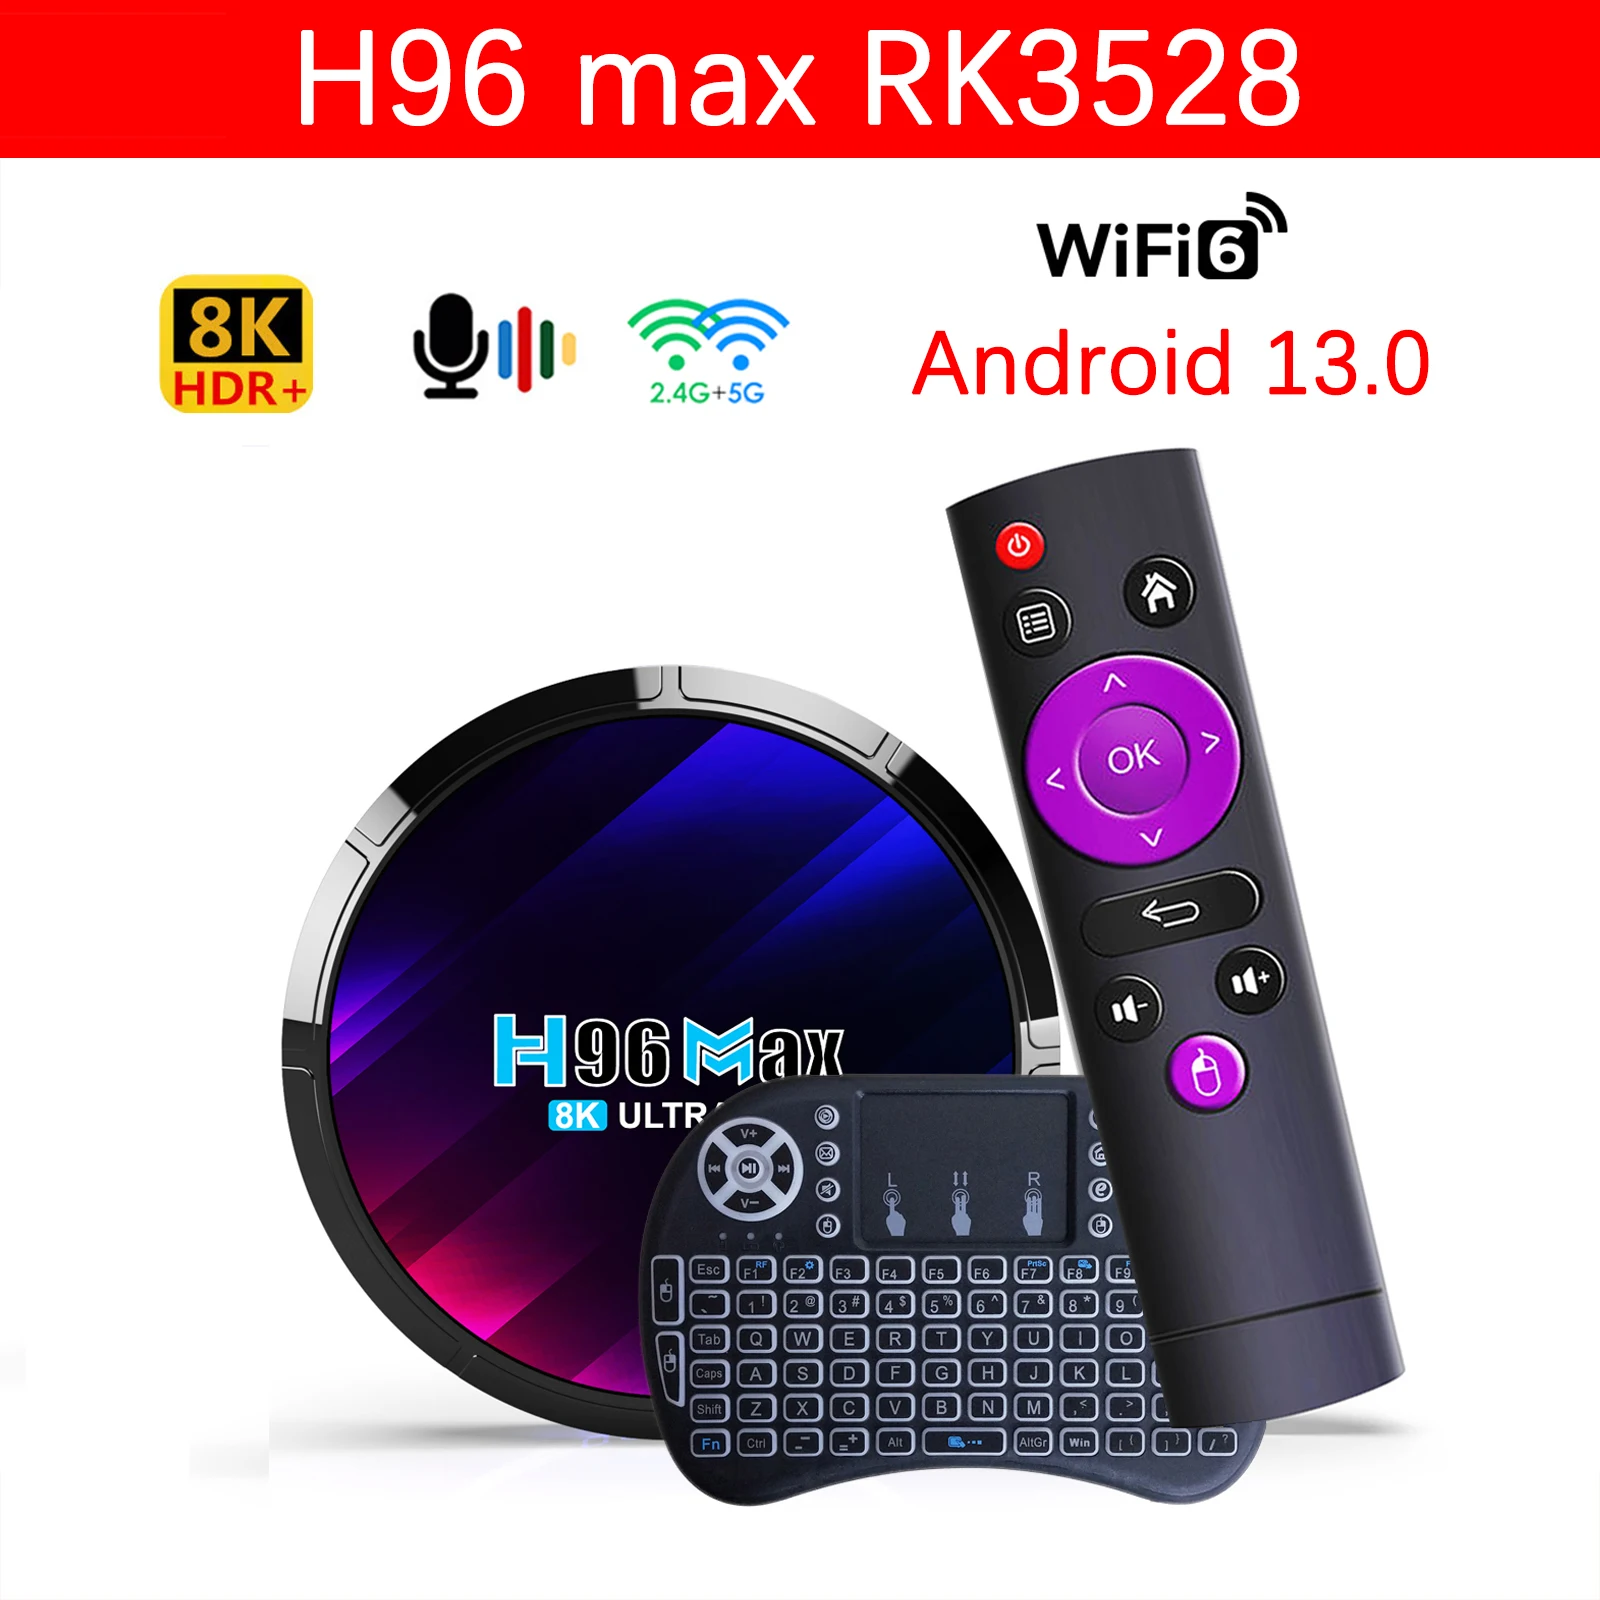 H96 MAX RK3528 Smart TV Box Android 13 4G 64GB 32G 8K Wifi BT Media player H96MAX TVBOX Android11 Set top box 2GB 16GB for xiaomi hk1 rbox k8 android 13 rk3528 quad core smart tv box wifi6 16gb 32gb 64gb 100m lan dual wifi 2 4g 5g bt5 0 8k hdr